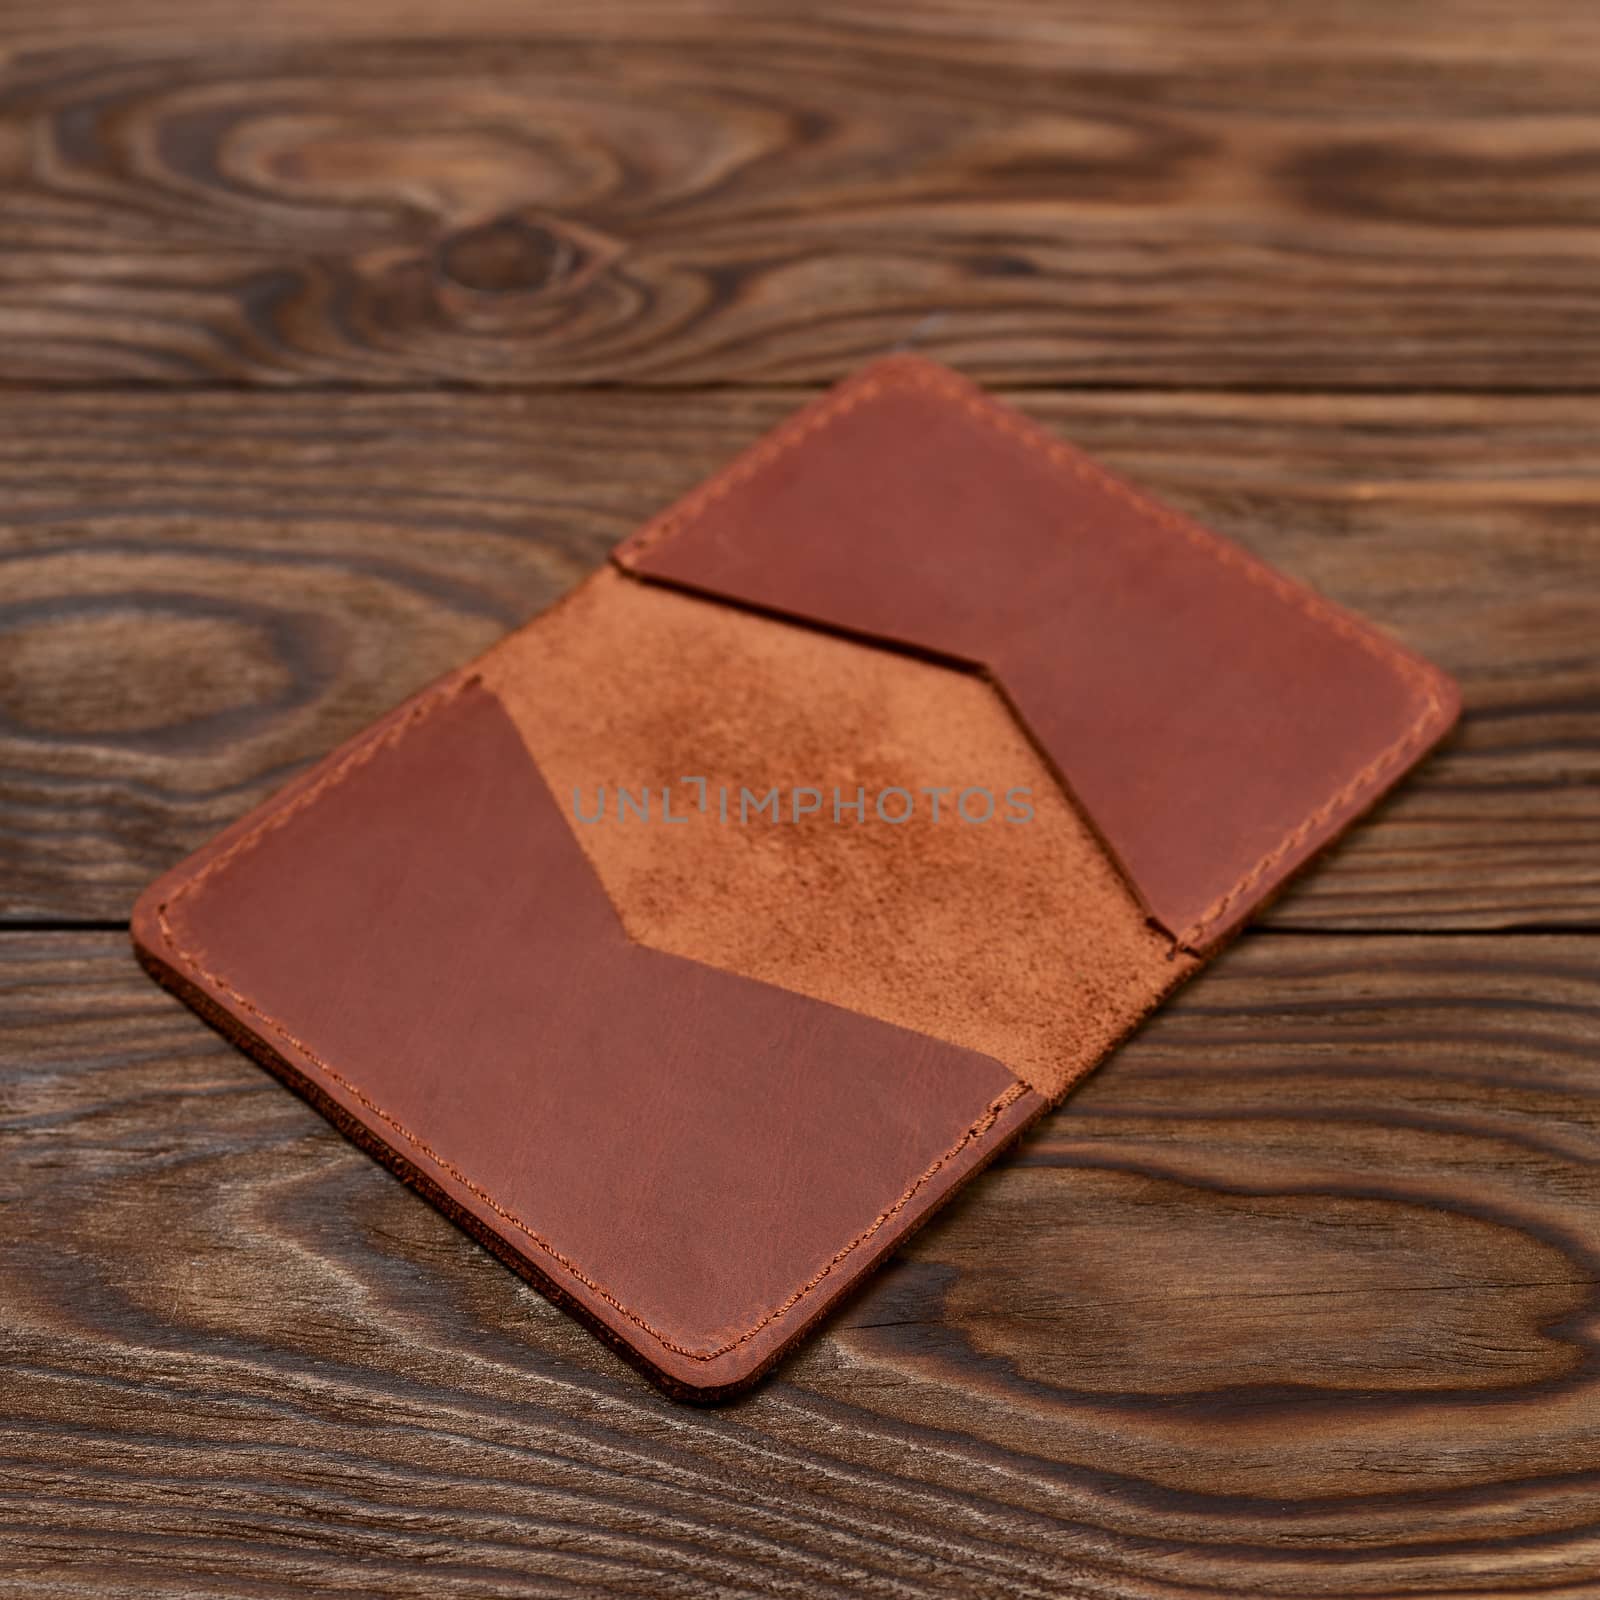 Handmade ginger leather cardholder on wooden background. Stock photo with blurred background. by alexsdriver